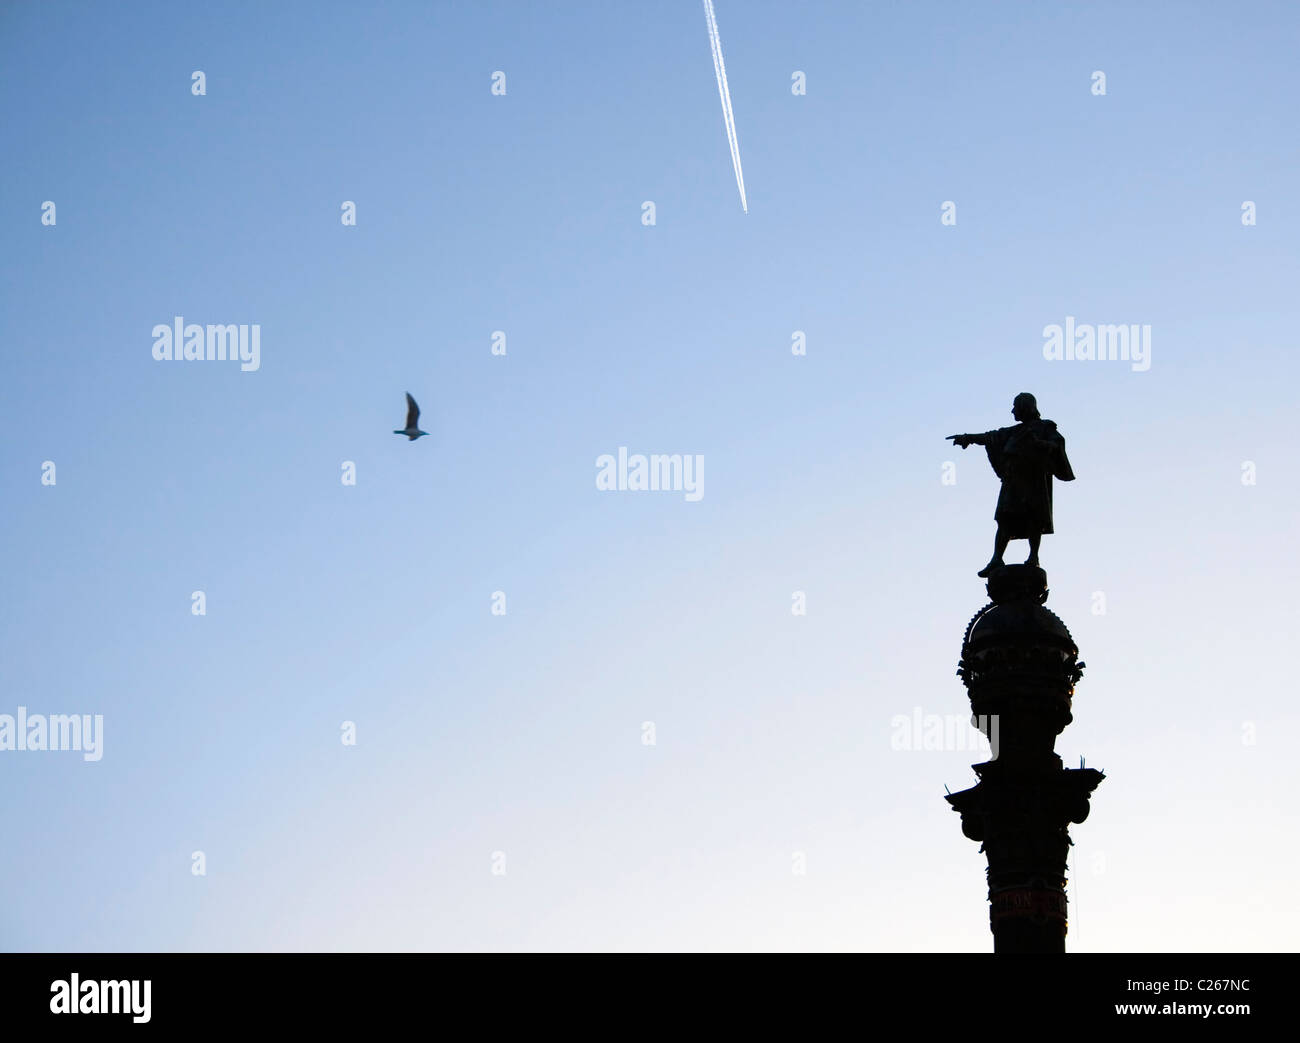 Barcelona, Spain. Silhouette of The Columbus Monument. Stock Photo